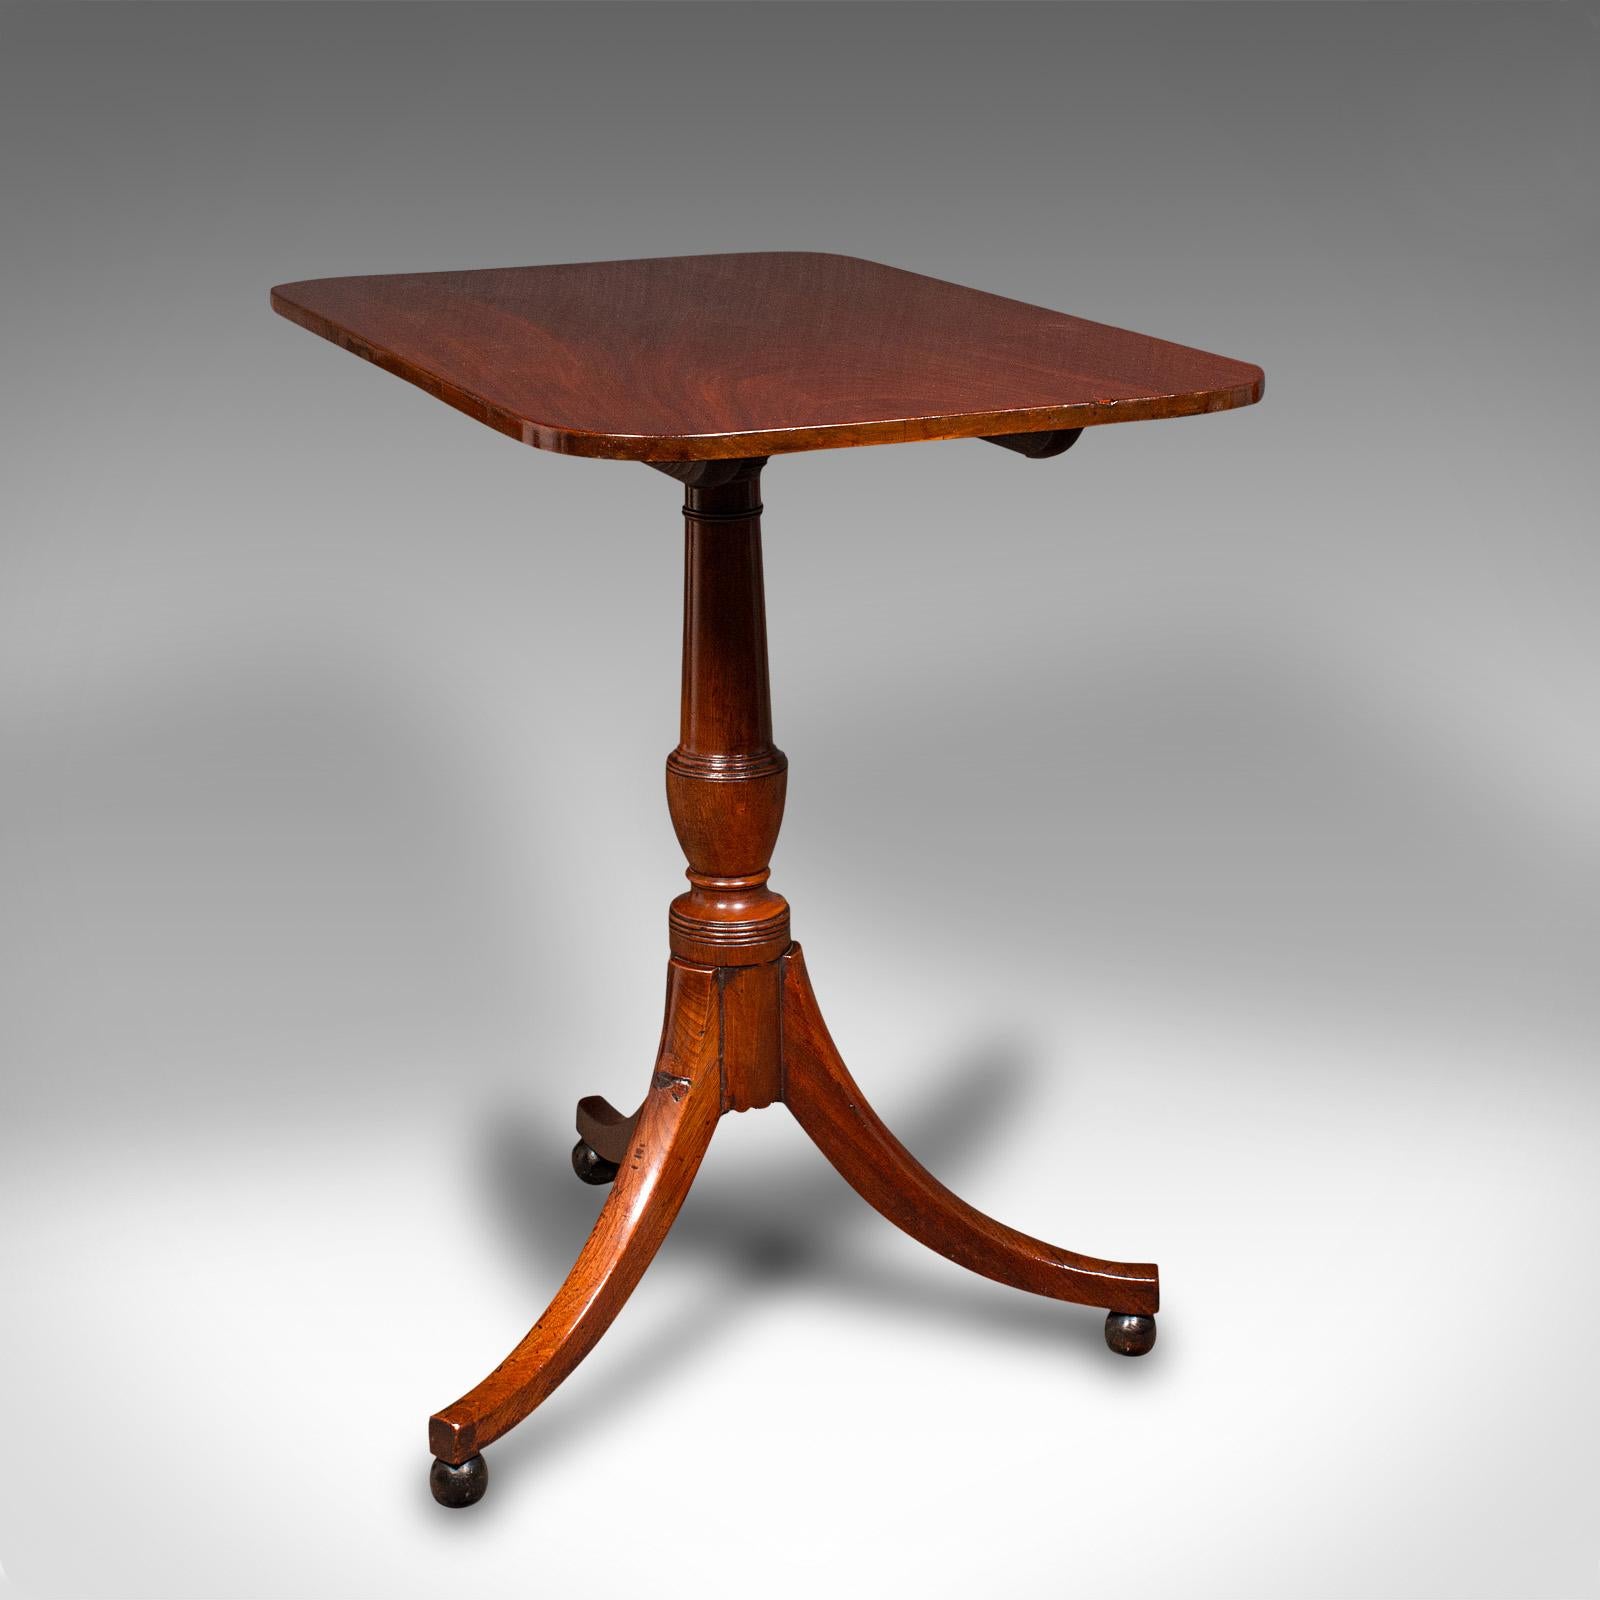 This is an antique supper table. An English, mahogany snap-top lamp or occasional table, dating to the Regency period, circa 1820.

Fine appearance, with superb colour and appealing form
Displaying a desirable aged patina and in good order
Select